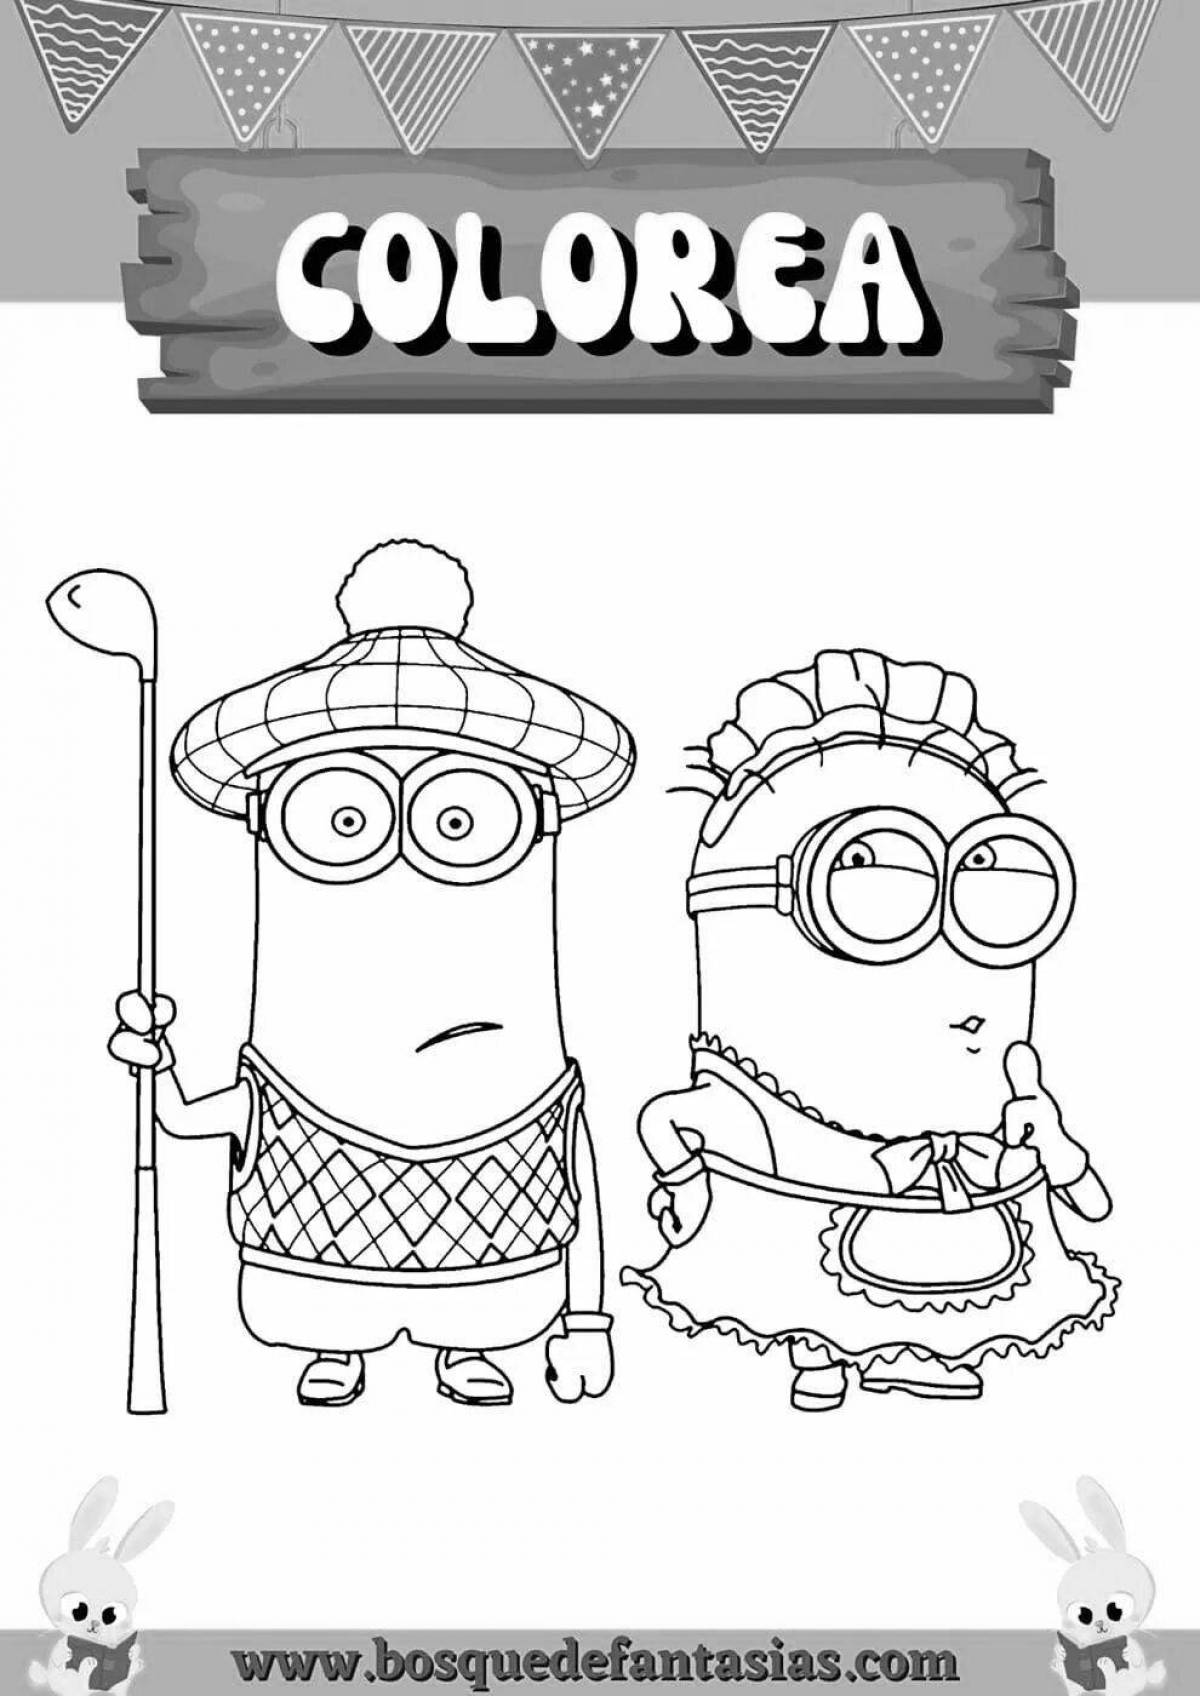 Playful despicable me minion coloring page